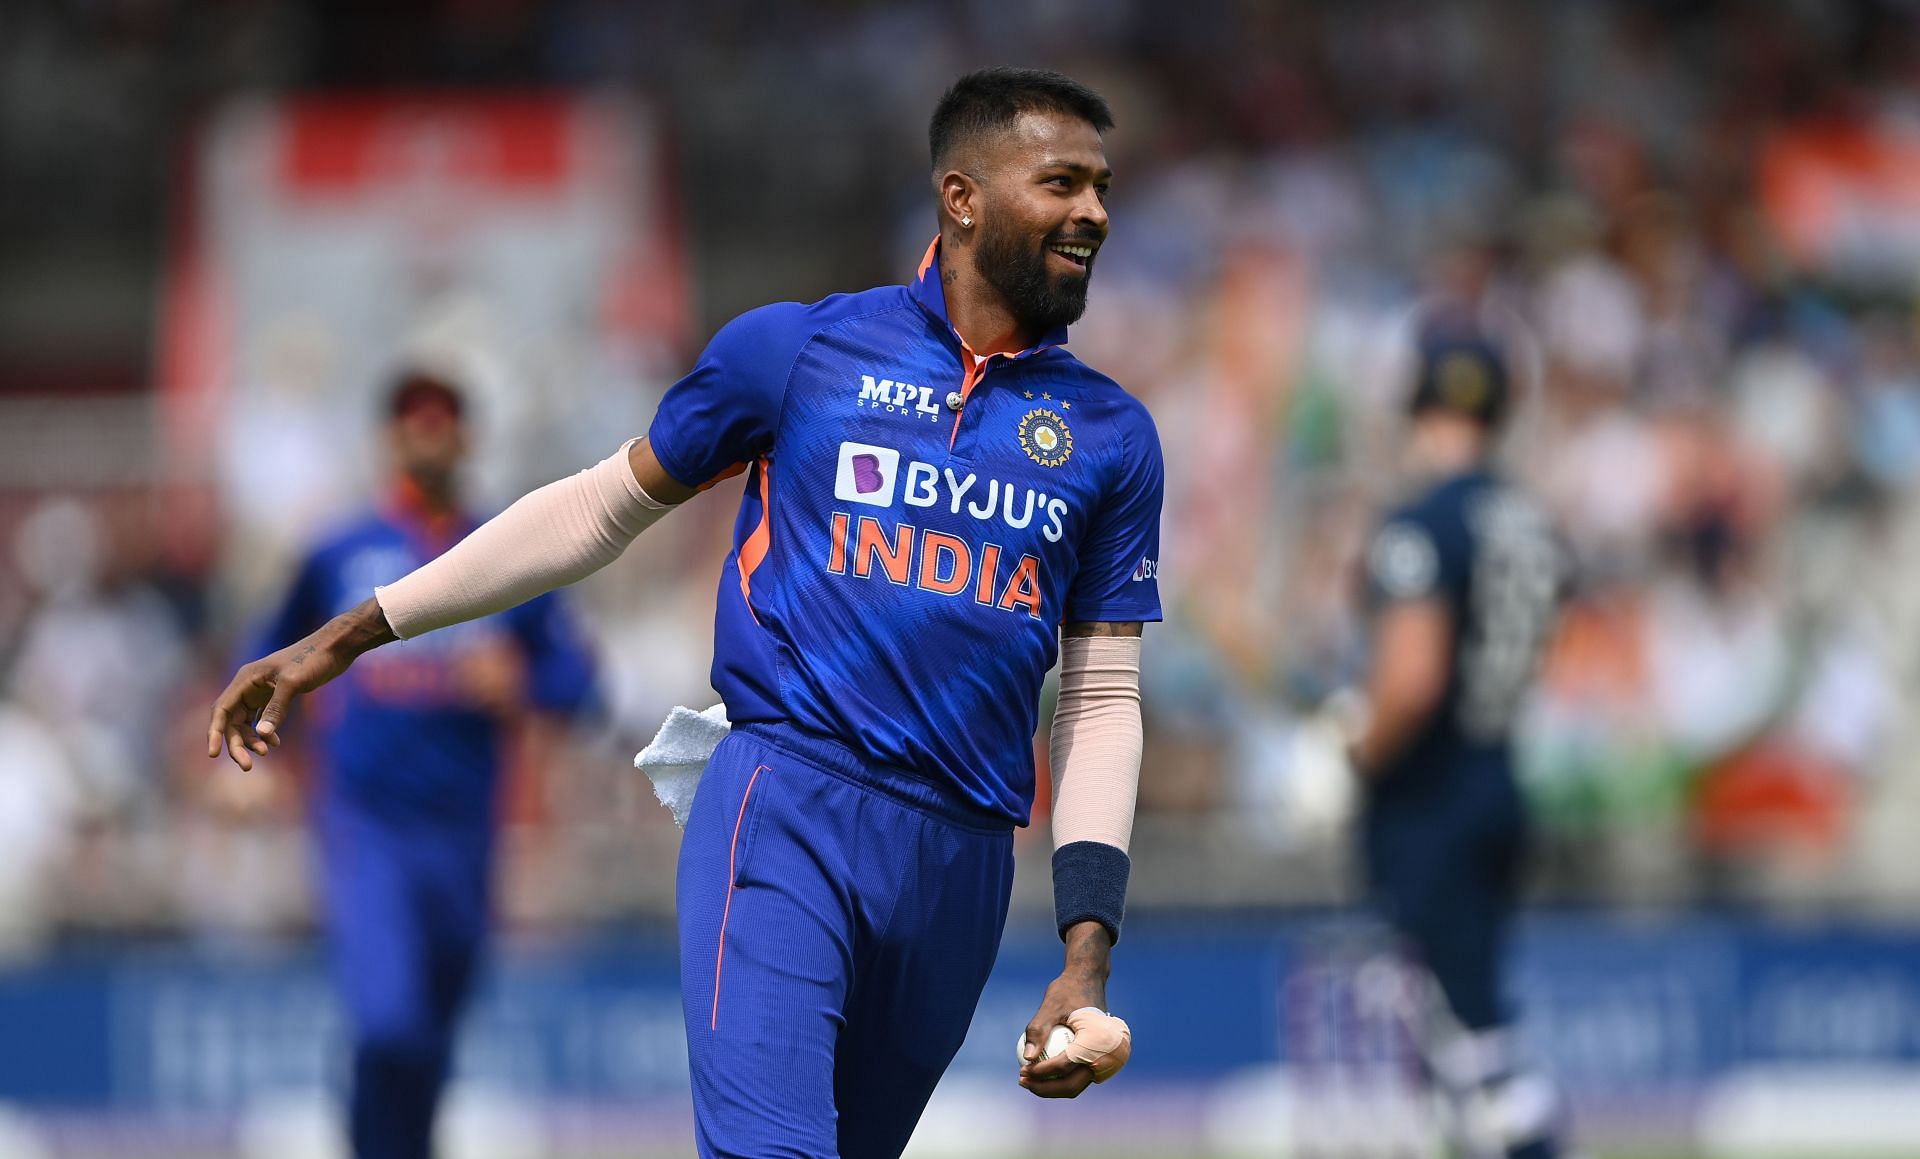 The new-look Hardik Pandya is an indispensable prospect for Team India